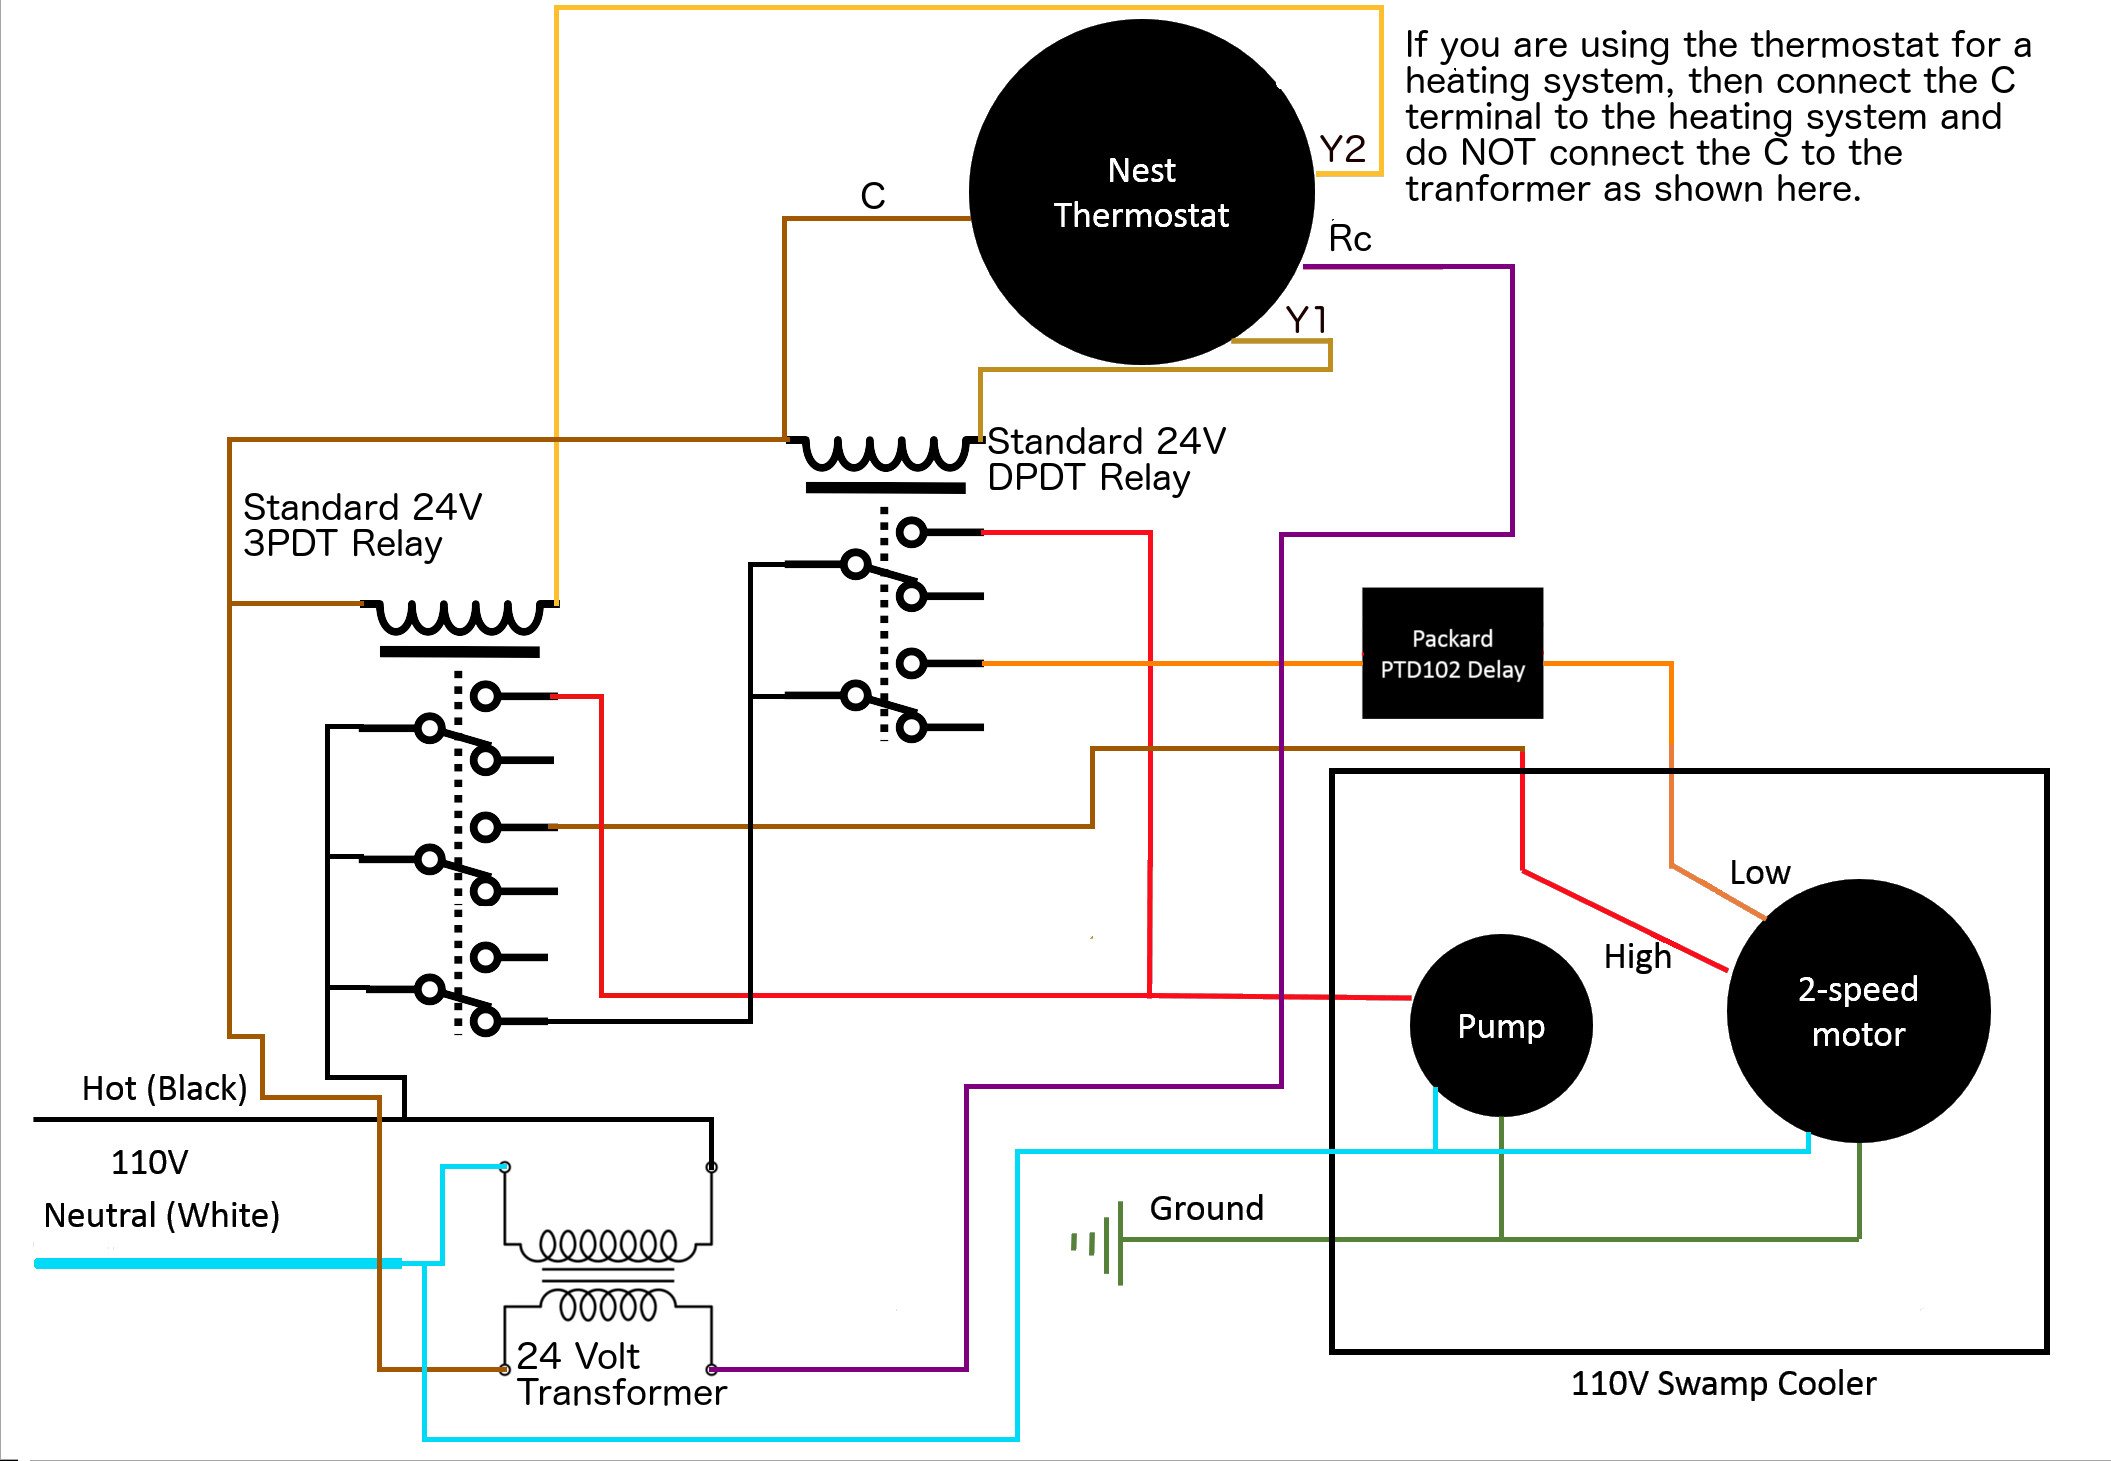 Wiring - Controlling 110V Swamp Cooler Using Nest Thermostat - Home - Wiring Diagram For Nest Thermostat